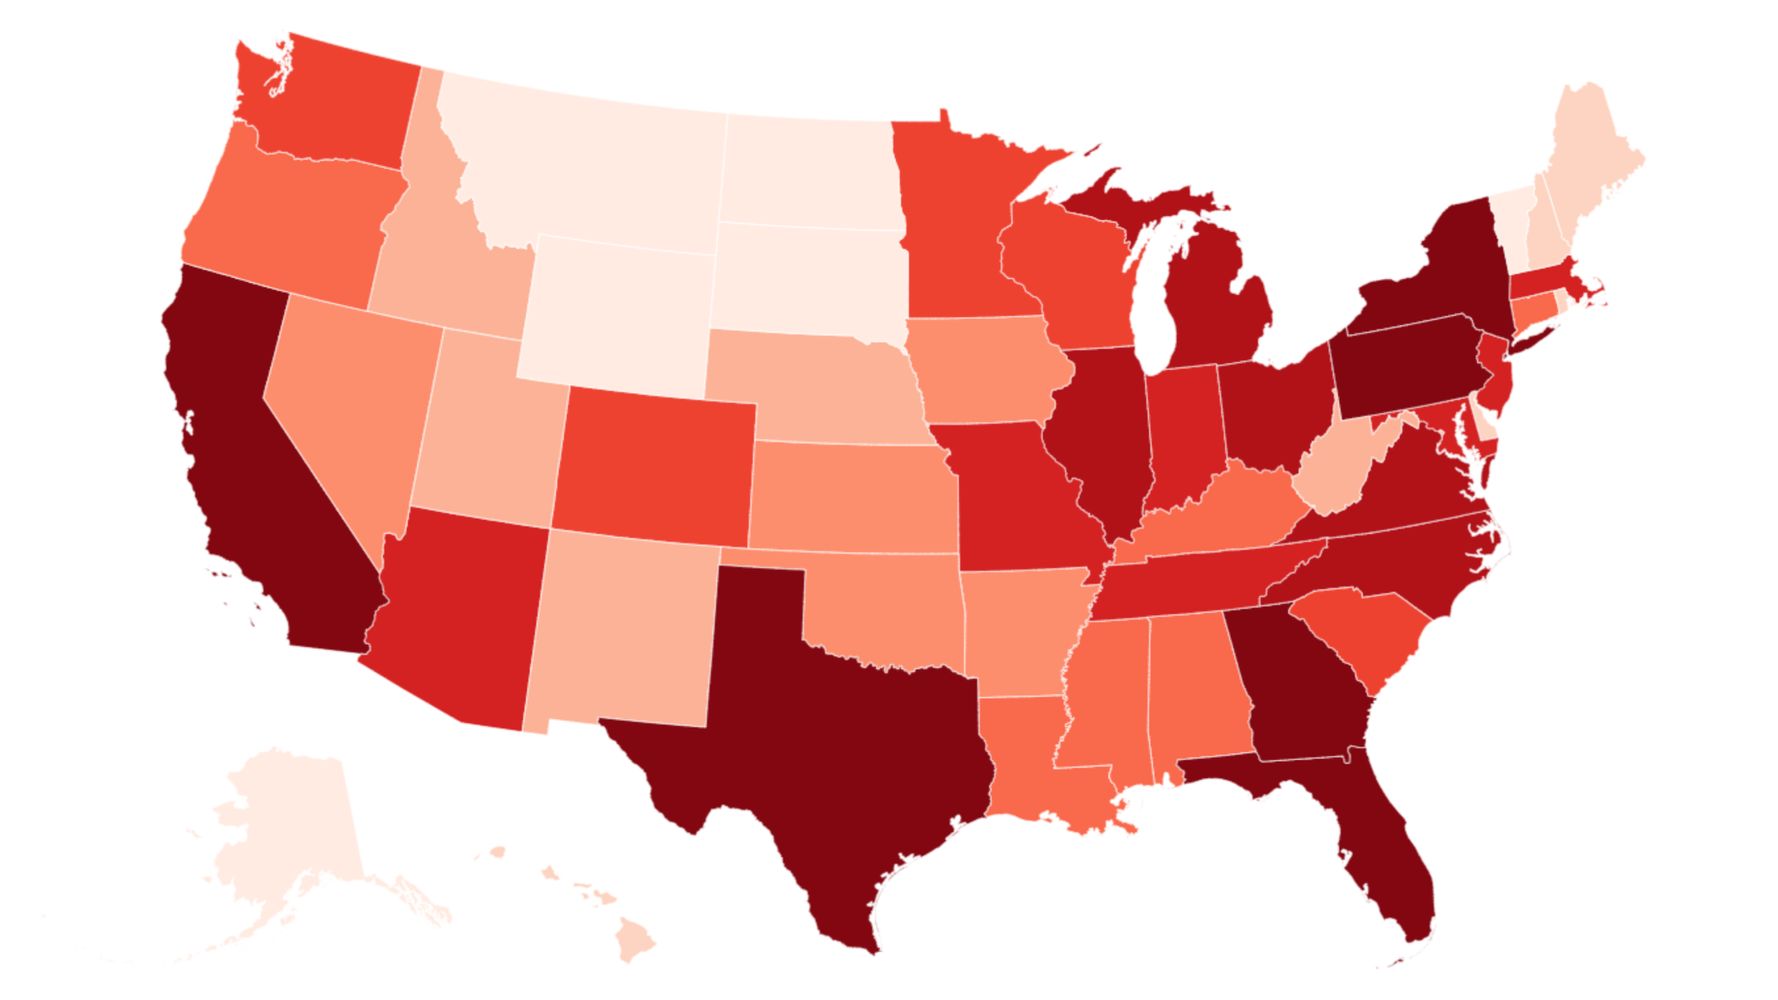 What's The Average Student Loan Debt By State? This Map Breaks It Down.